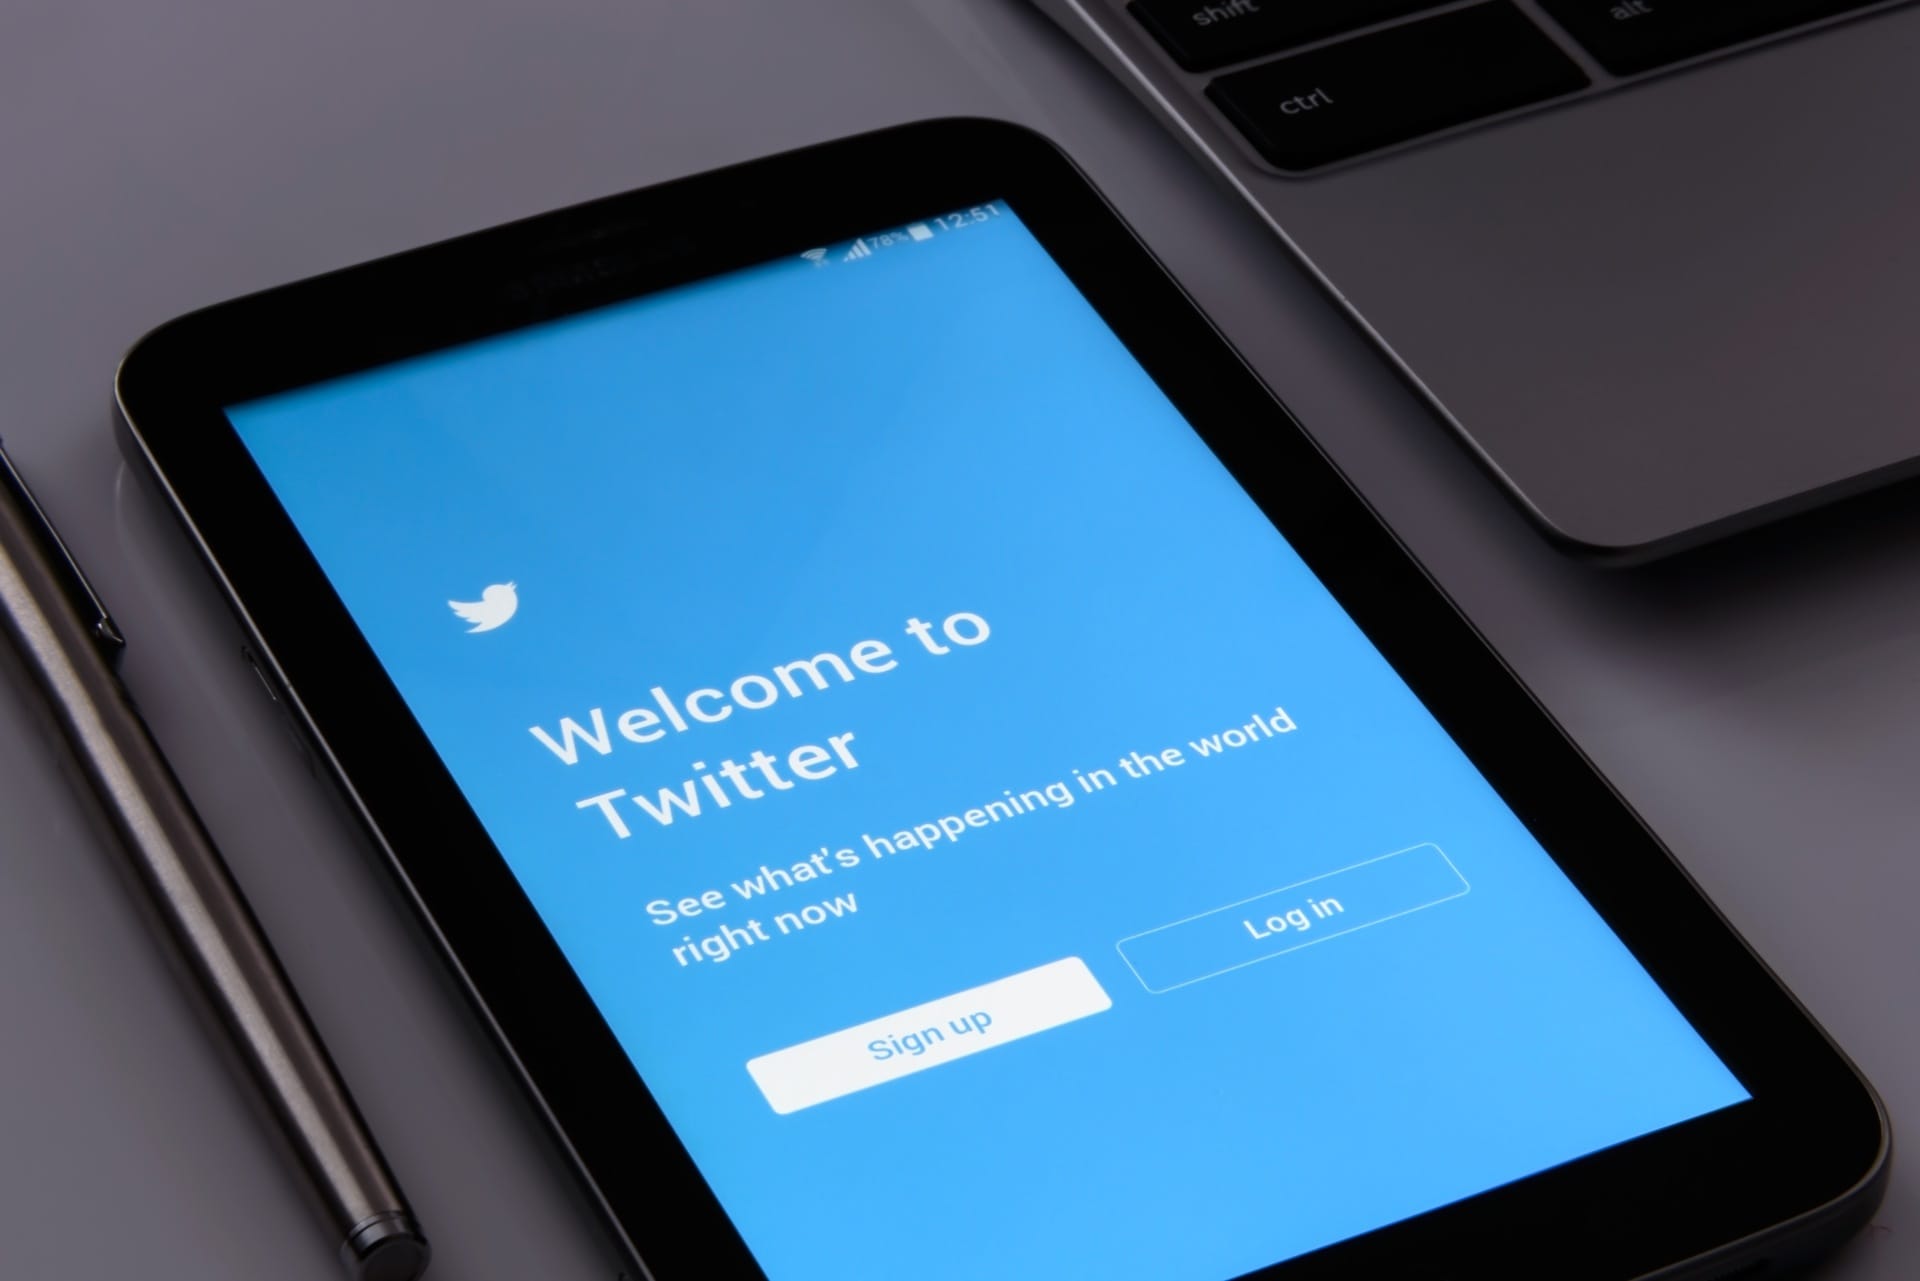 Key Ingredients to Building a Killer Twitter Profile - Sachs Marketing Group